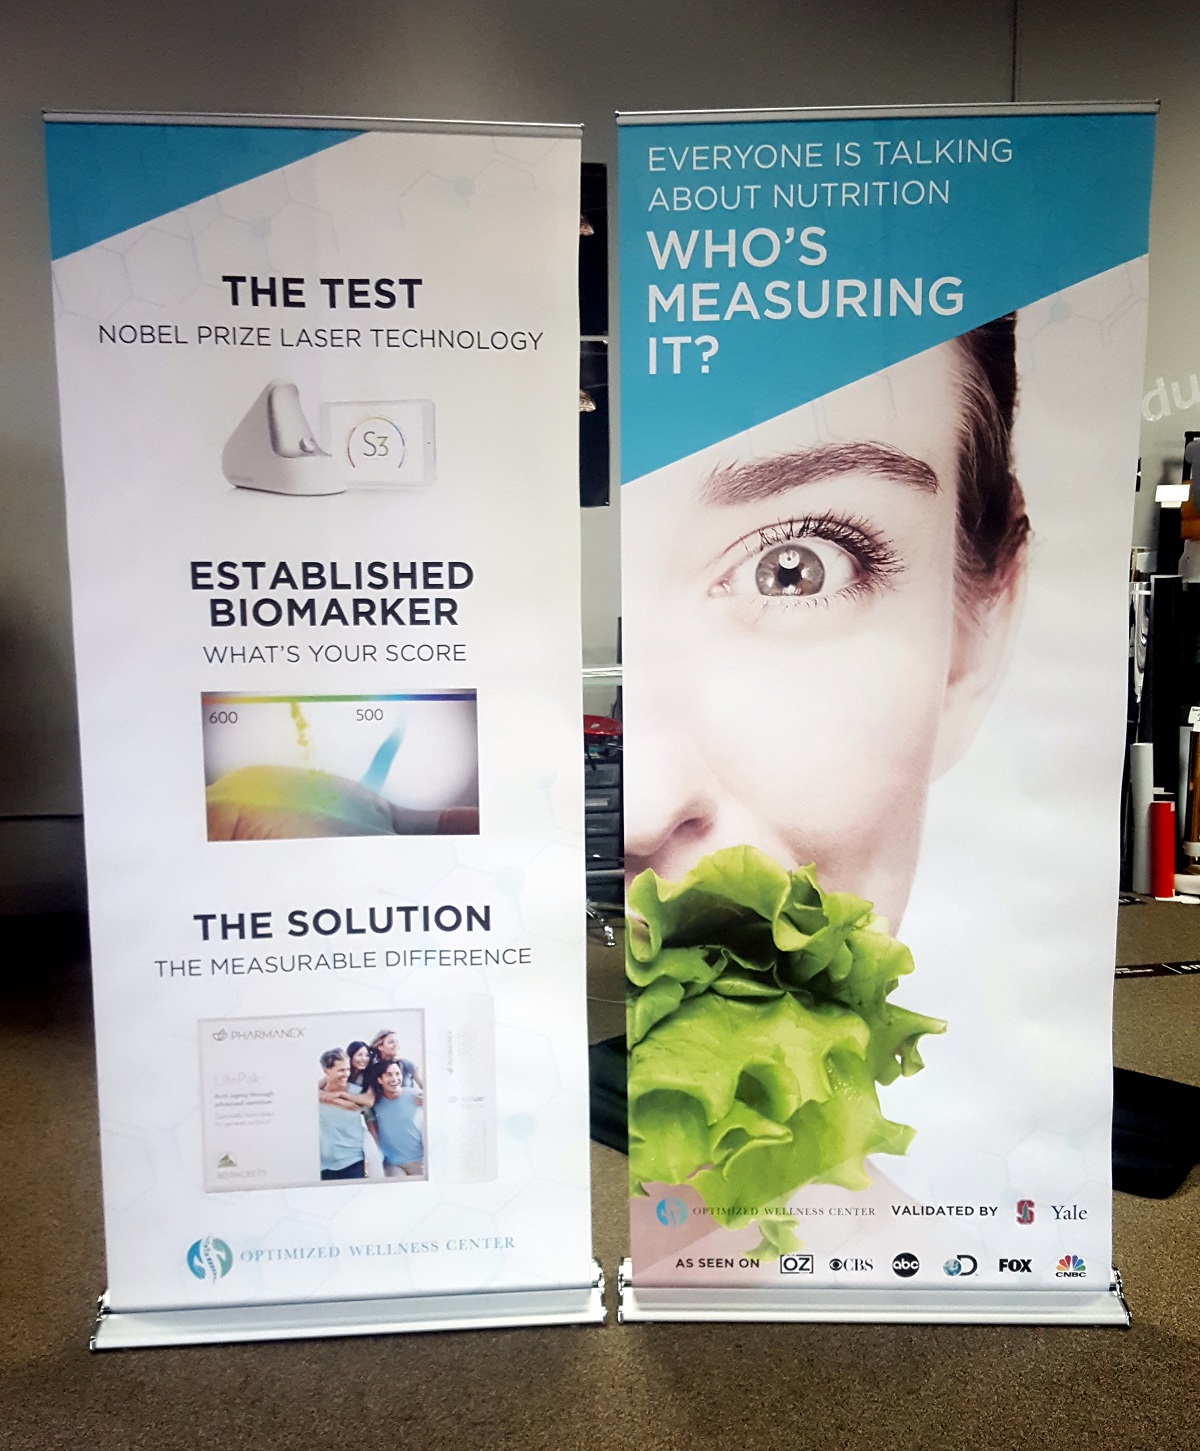 Two personalized banner stand ads for a wellness company.